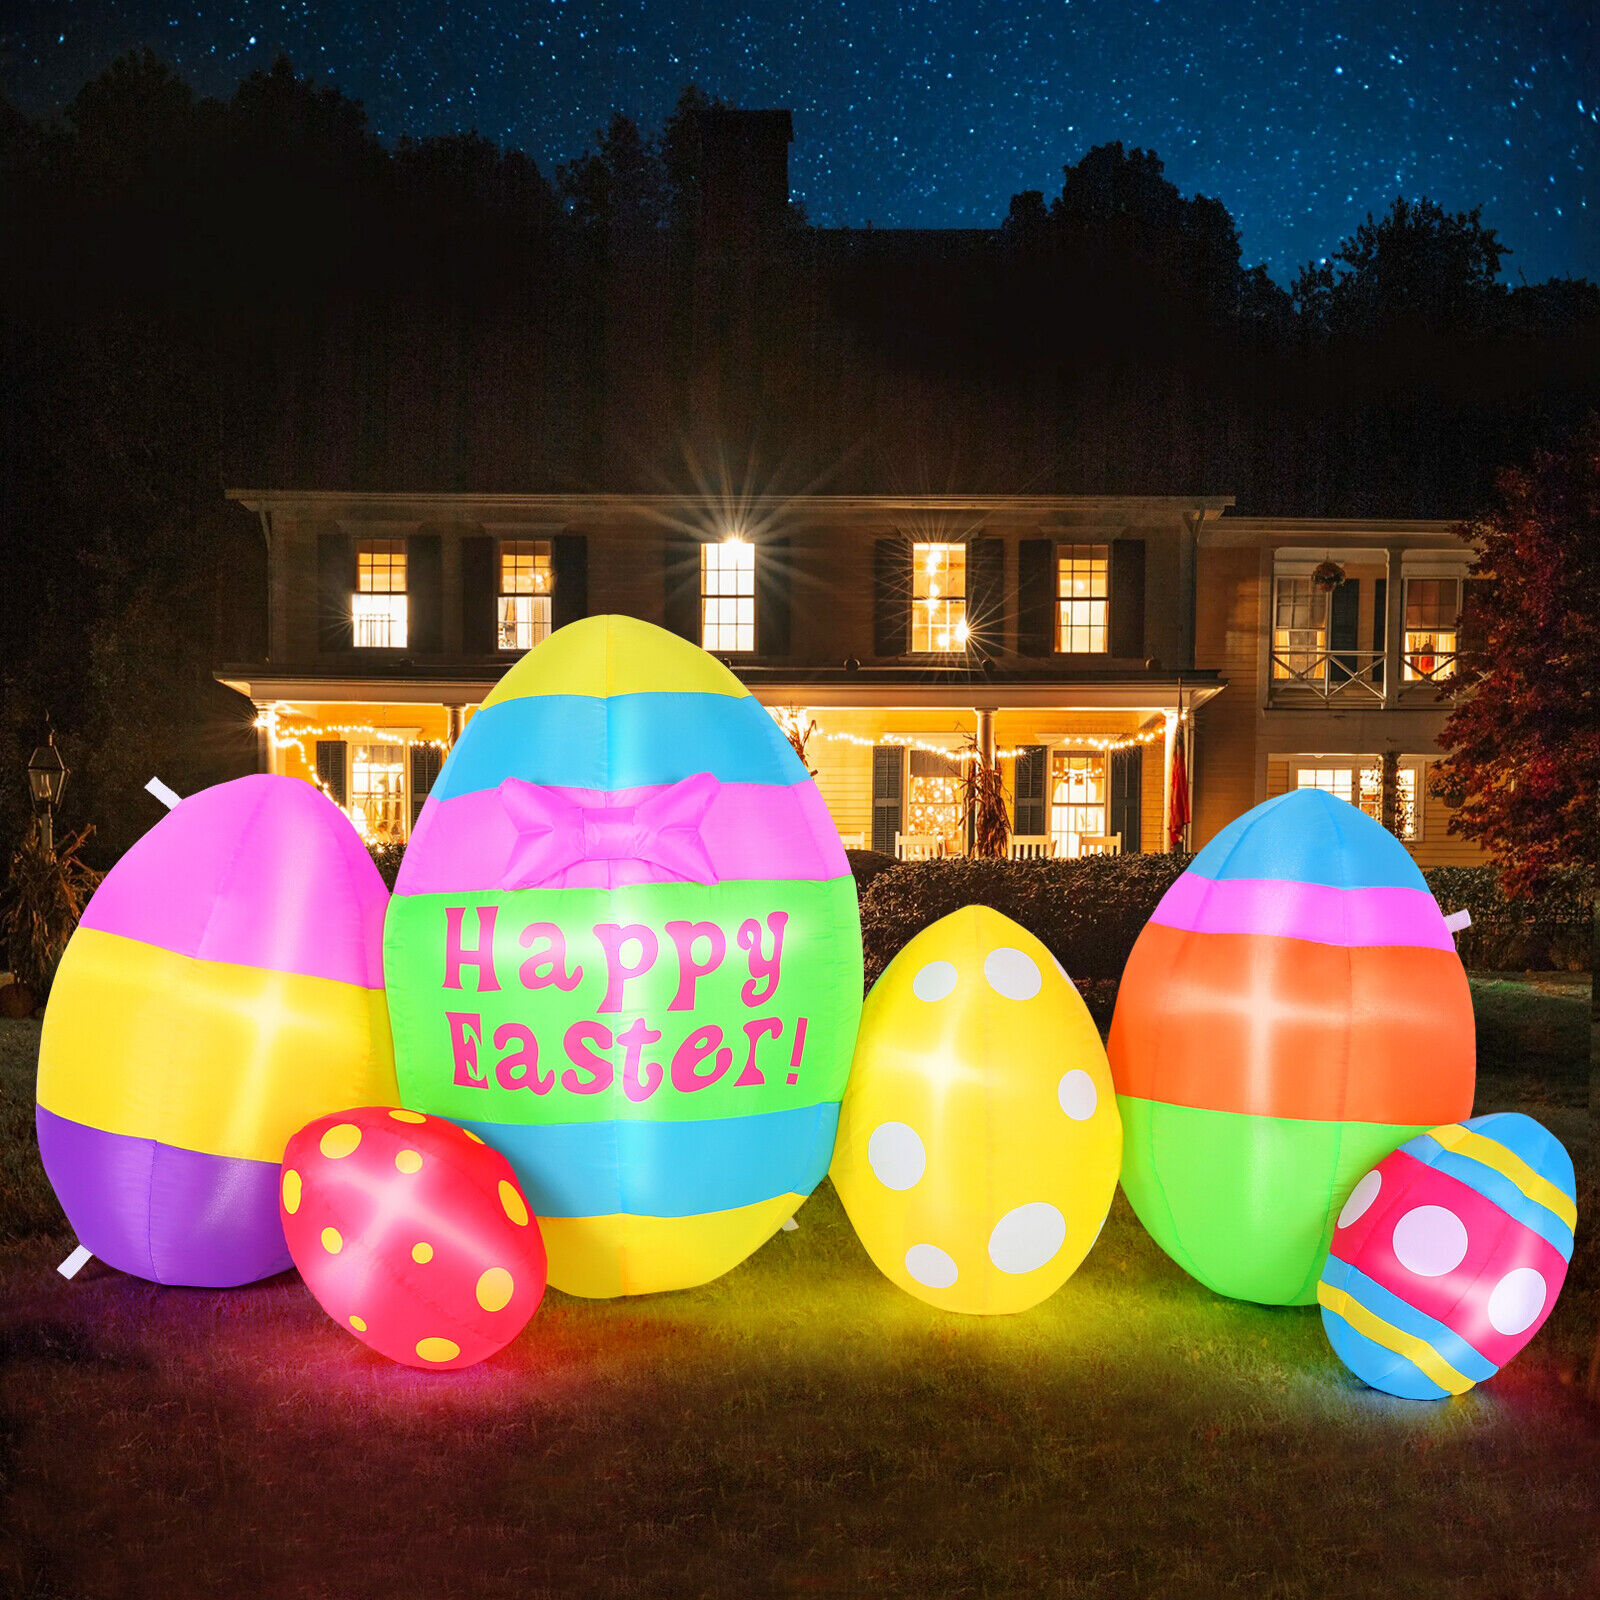 CAMULAND 6 Easter Eggs Decor 5.9FT Inflatable Built-in LED lights Garden Outdoor